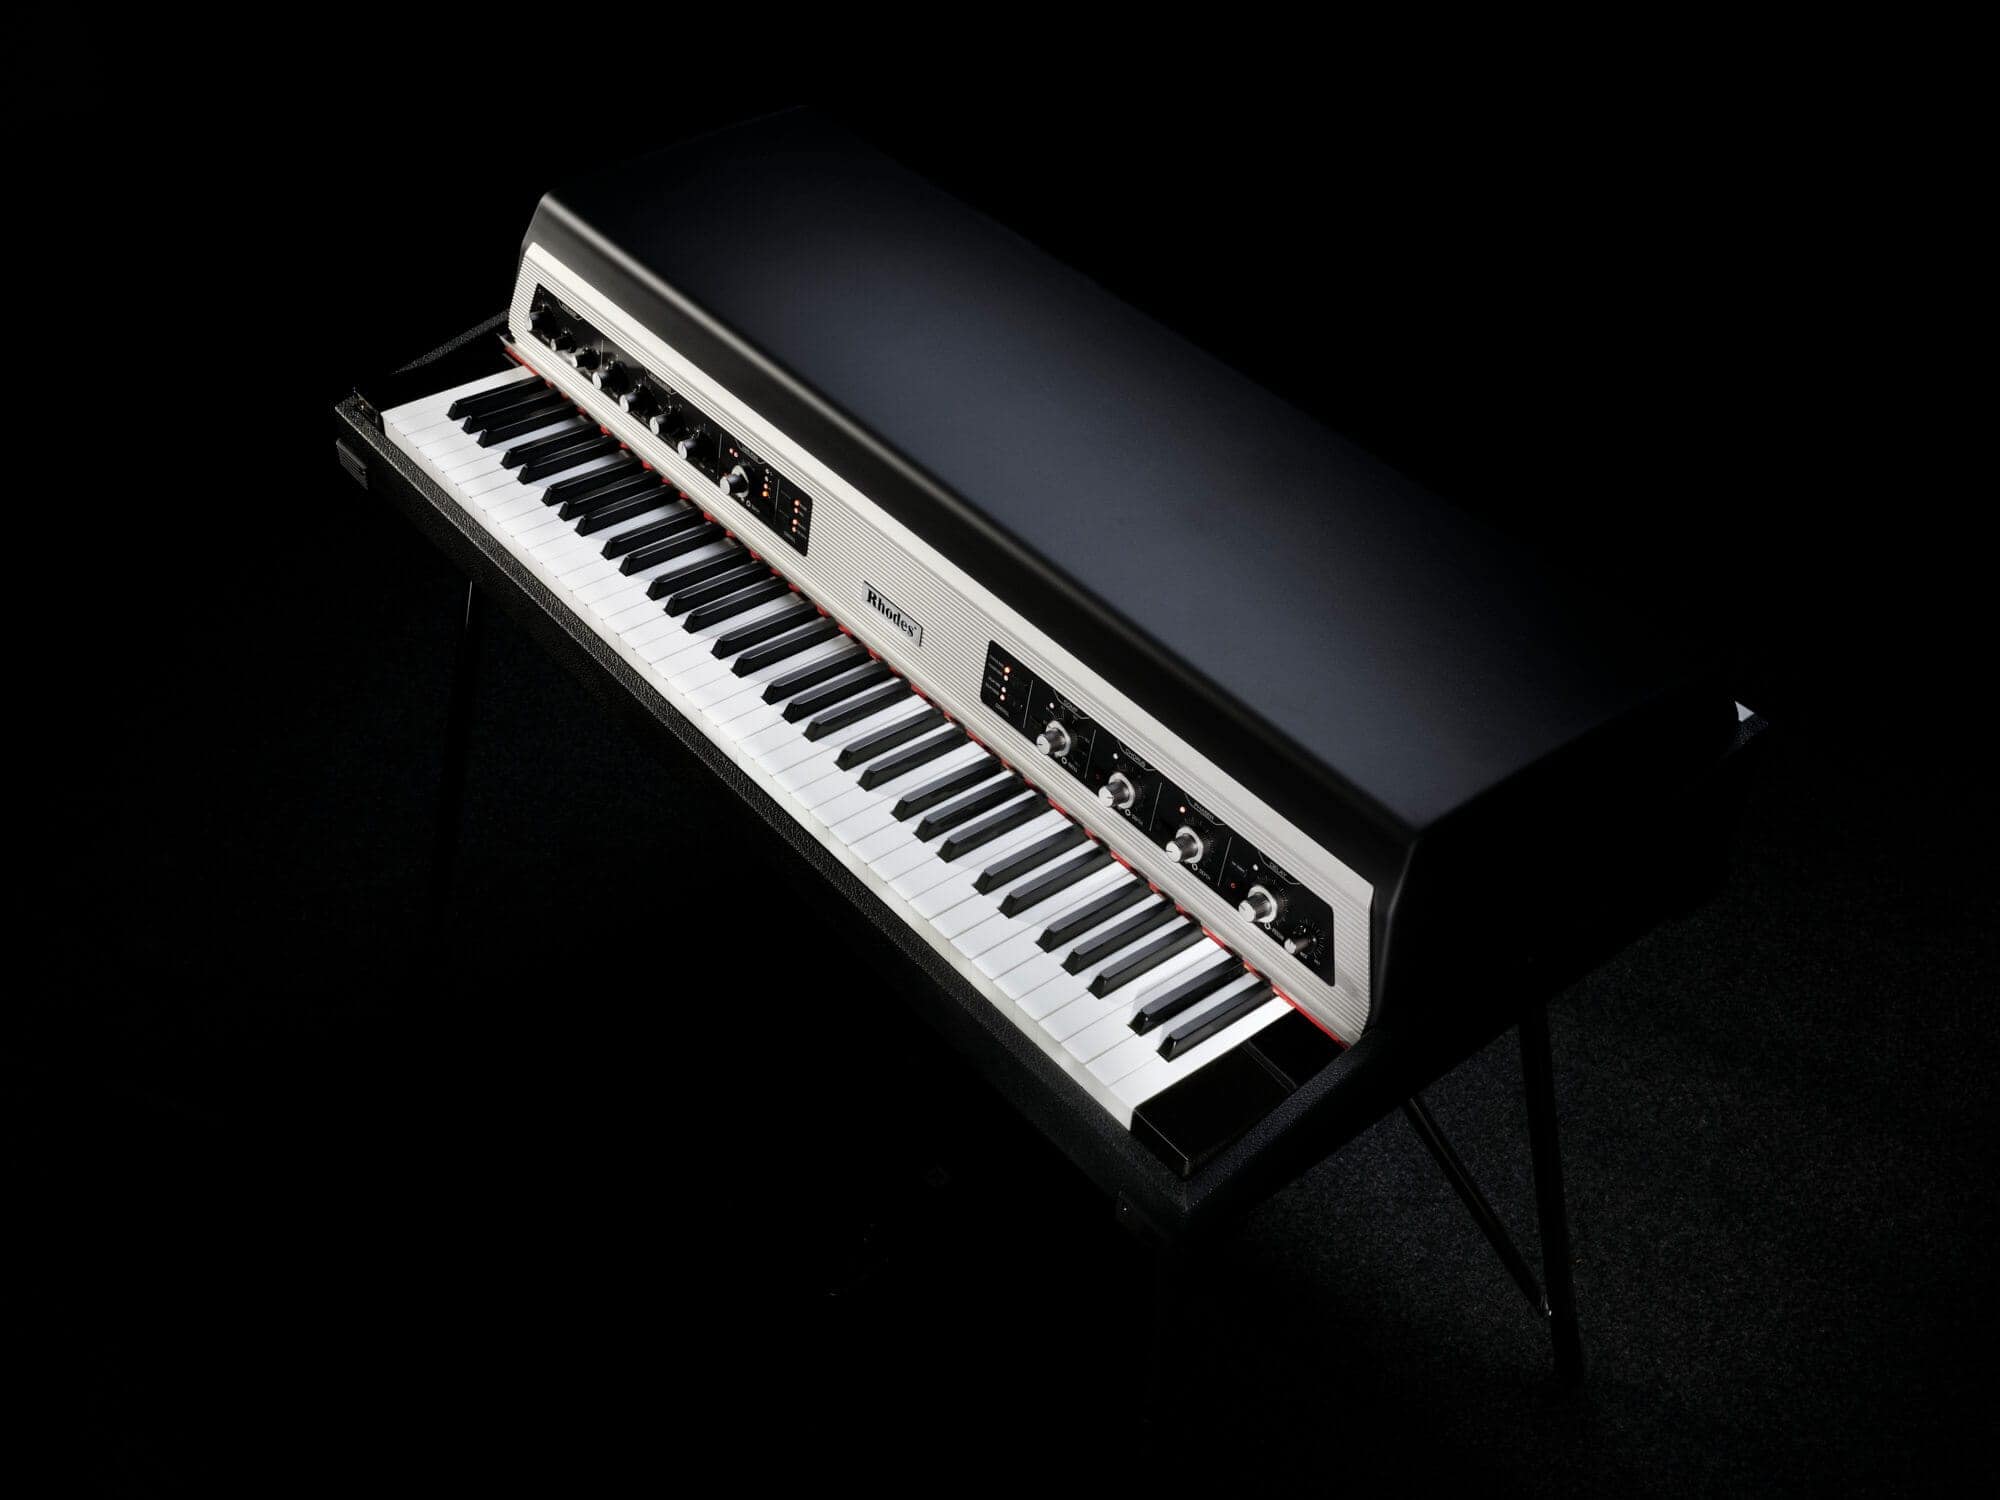 The RHODES MK8 Electric Piano Product Photo Image Credits: Rhodes